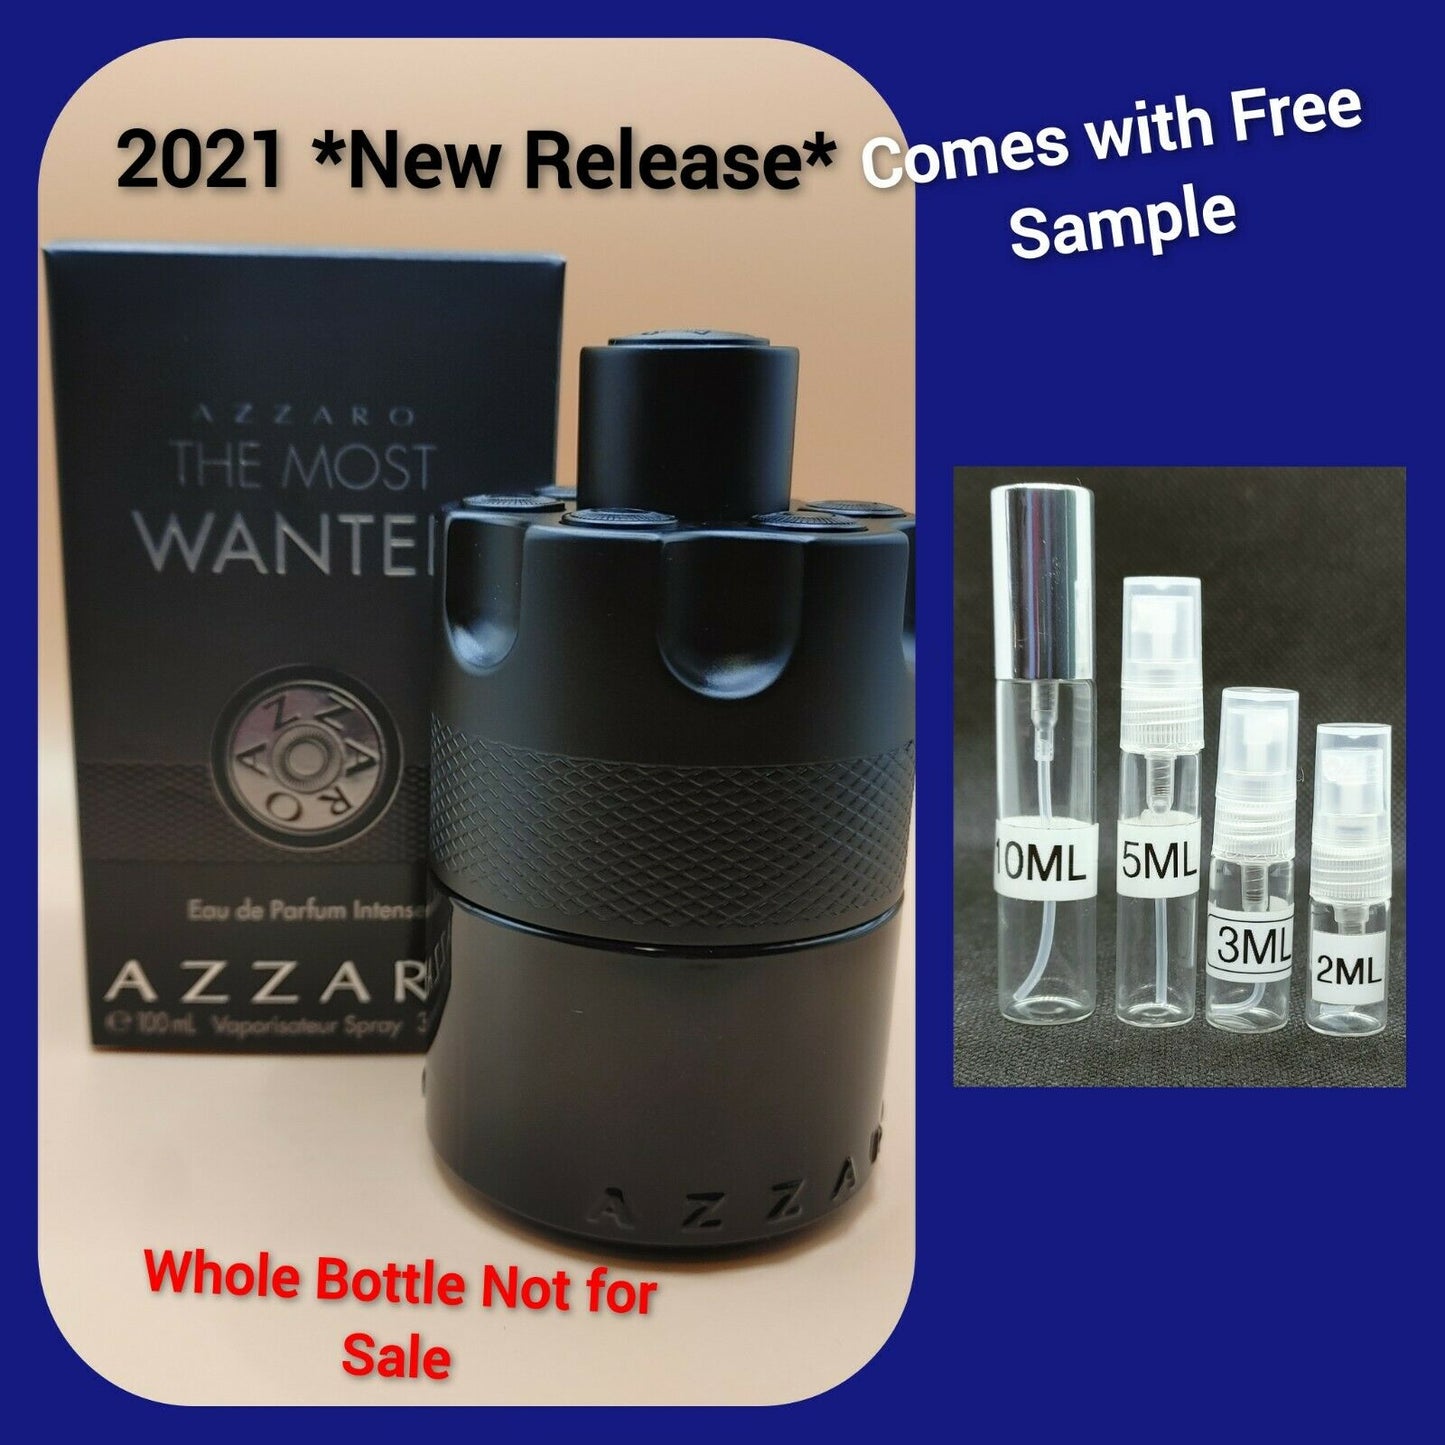 Azzaro The Most Wanted Samples